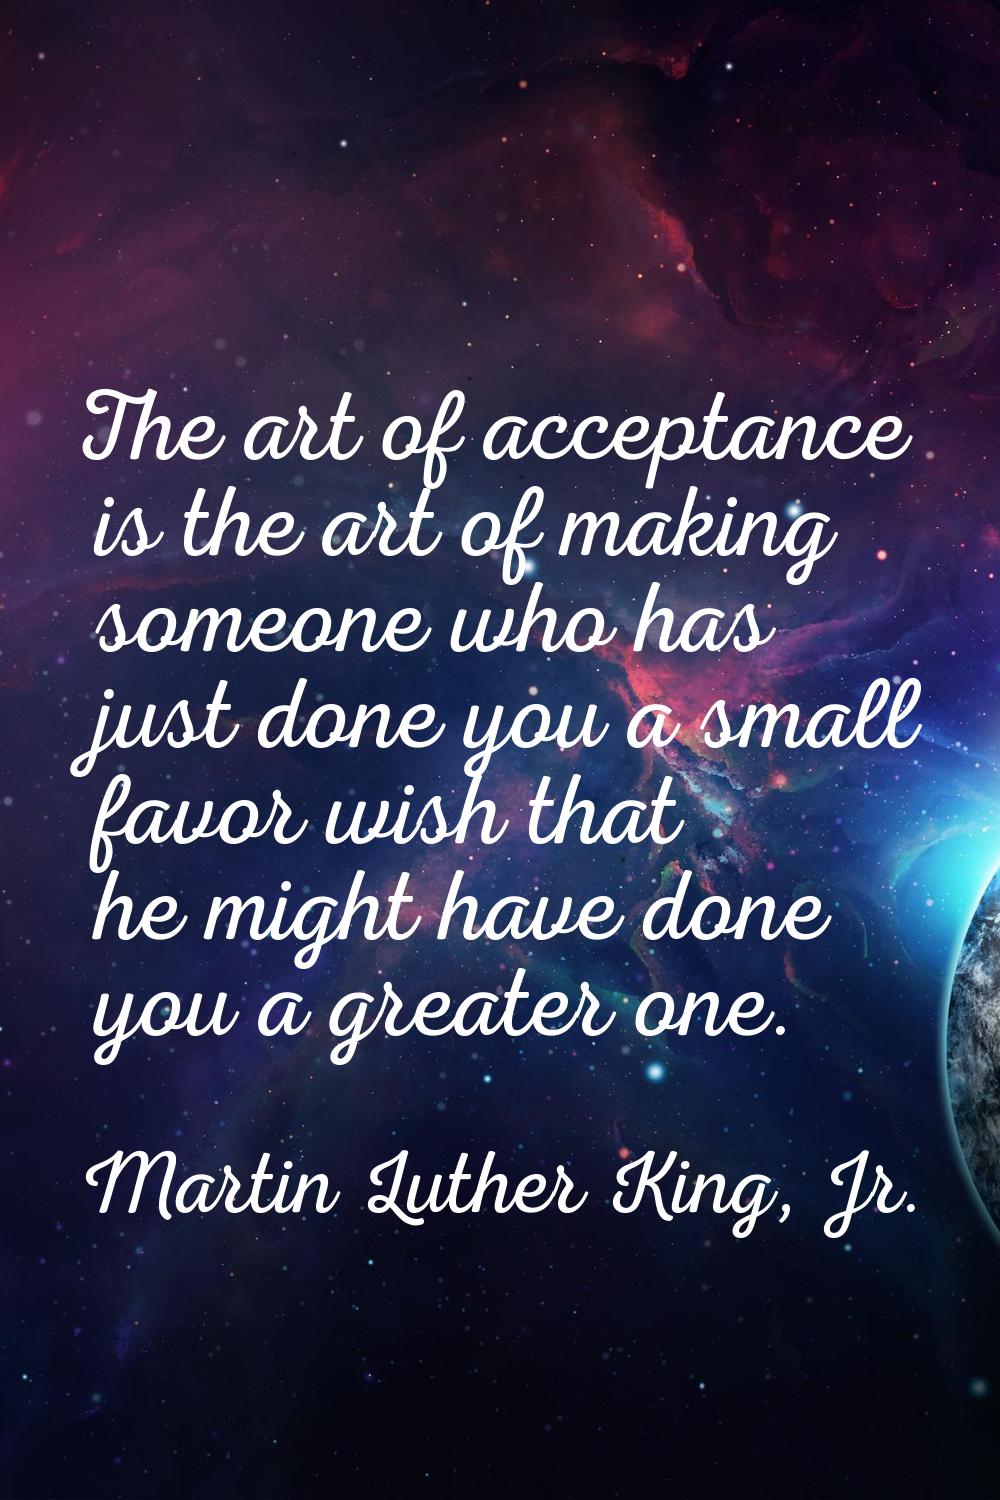 The art of acceptance is the art of making someone who has just done you a small favor wish that he